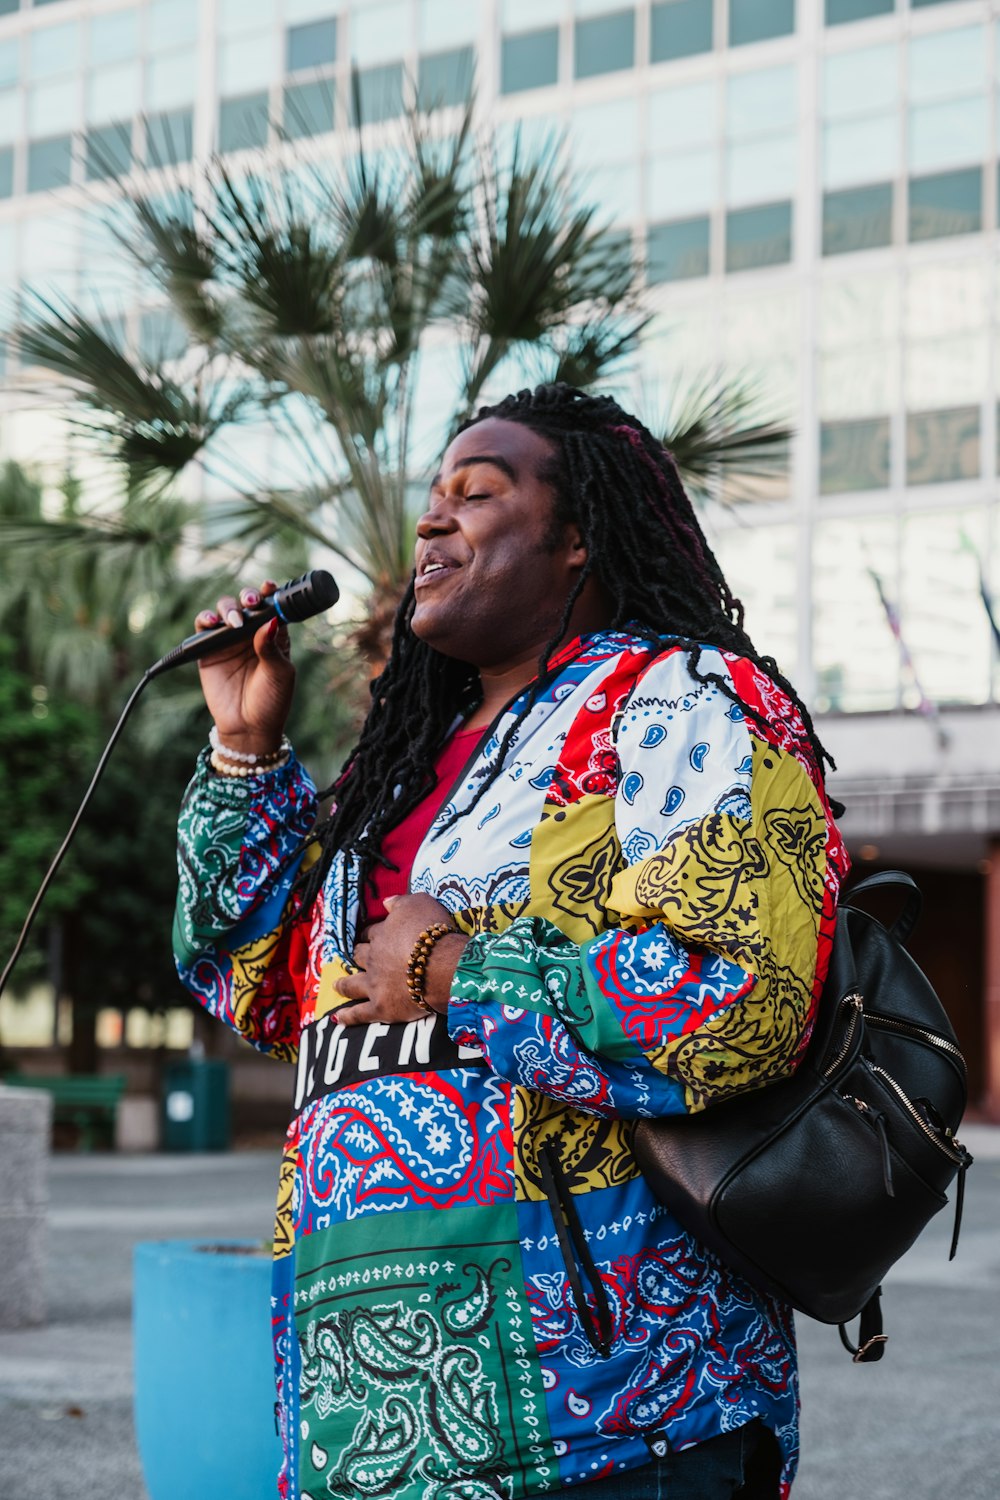 a woman with dreadlocks sings into a microphone